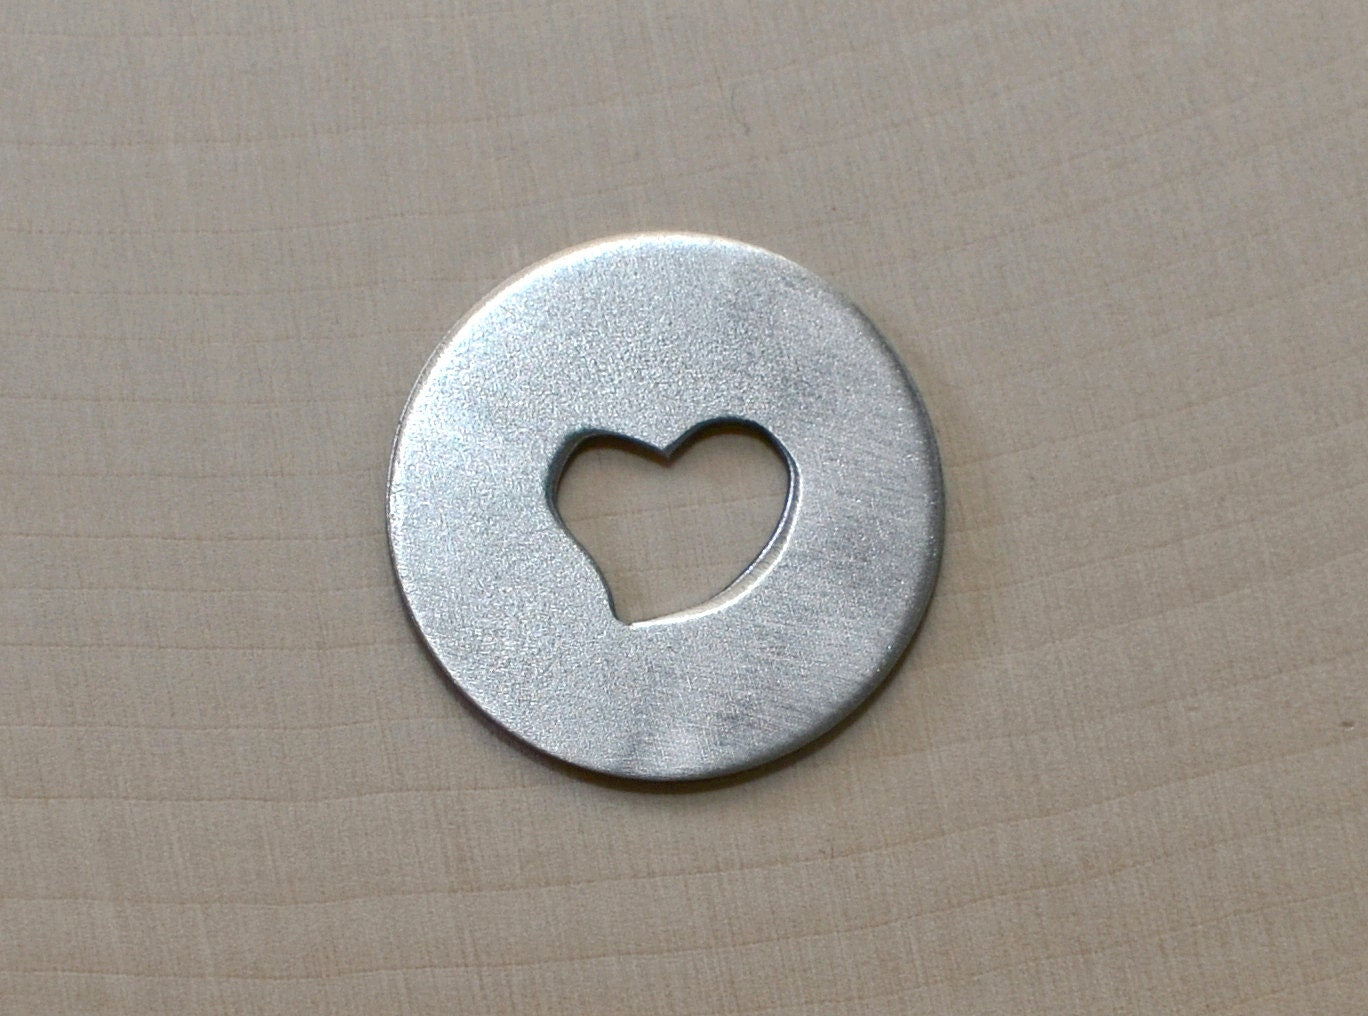 Golf ball marker with a heart cut out